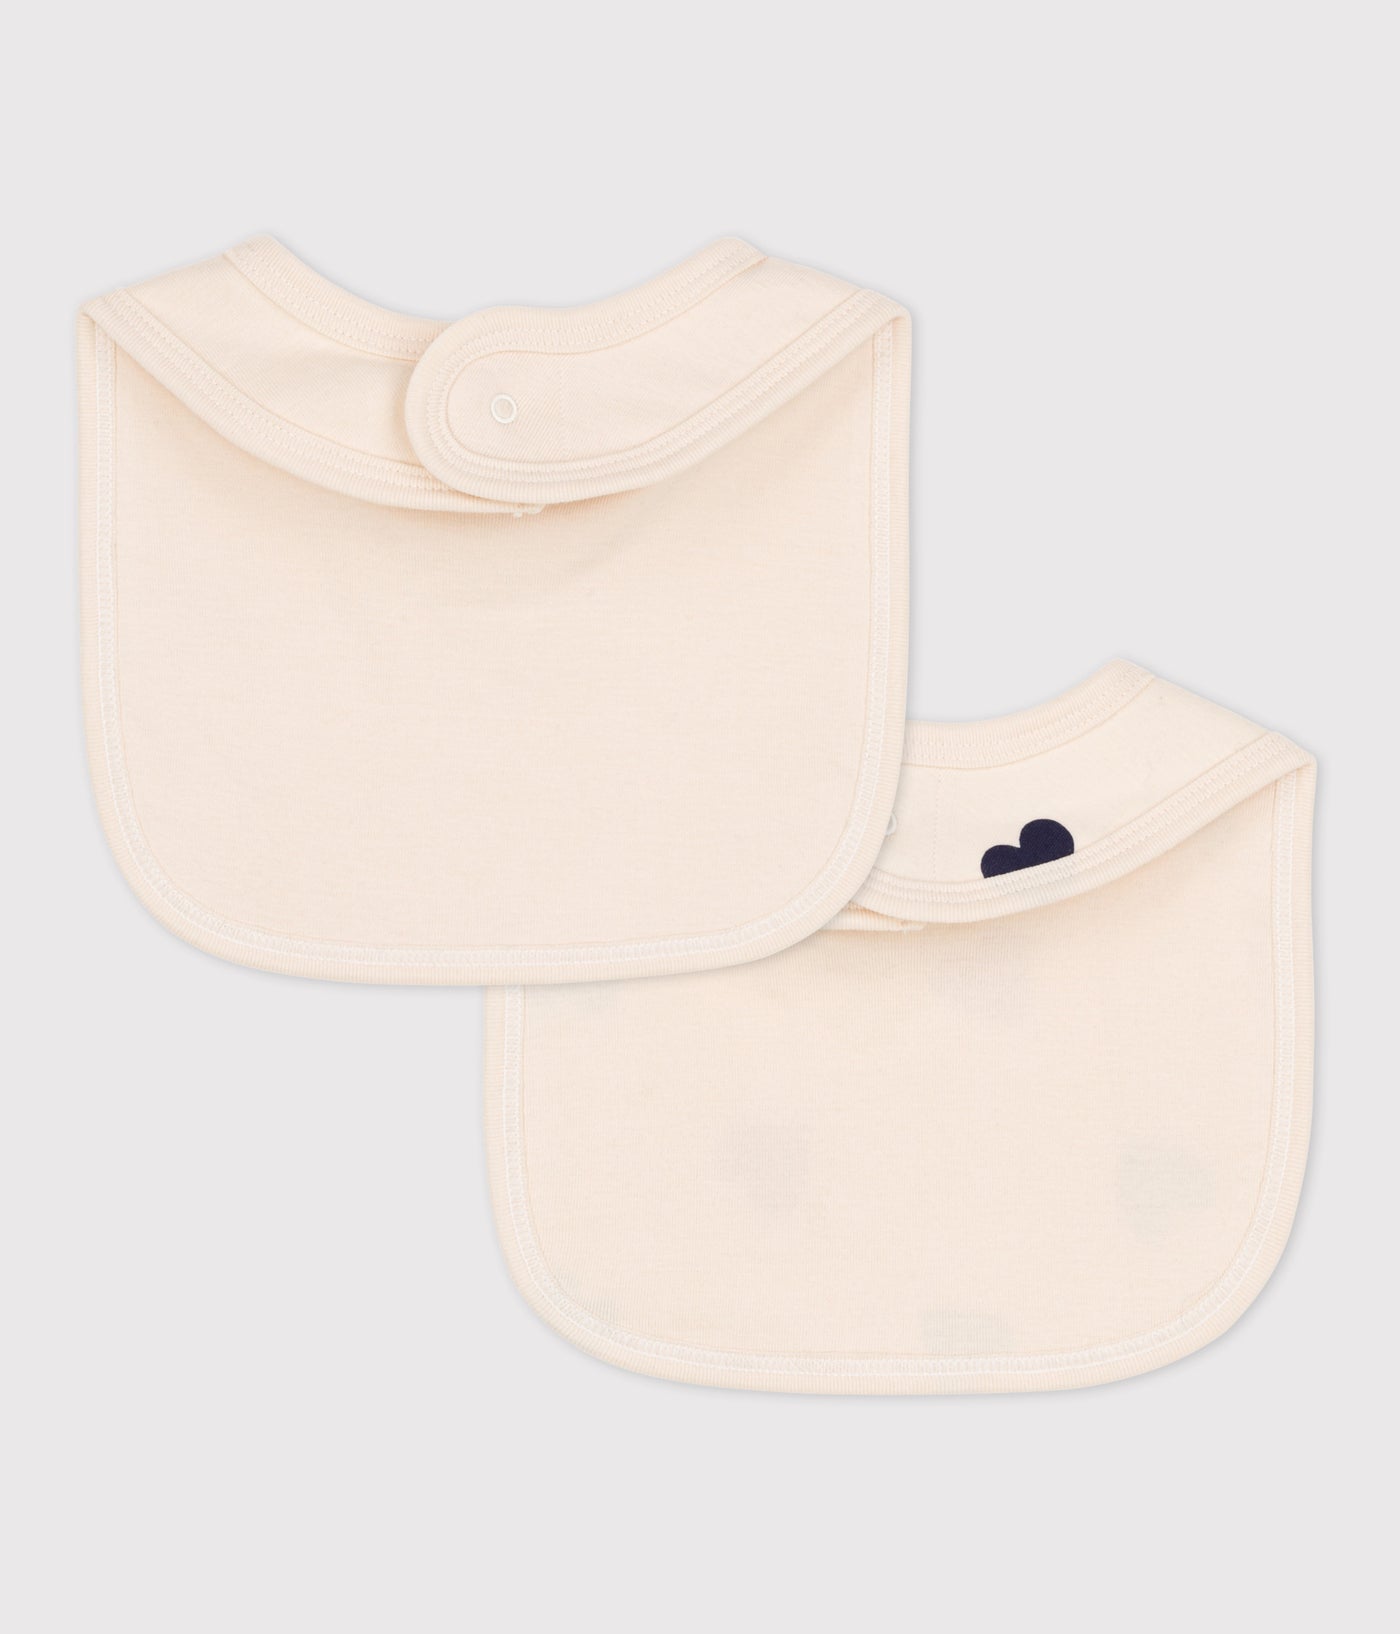 HEART PATTERNED COTTON BABY BIBS - 2-PACK